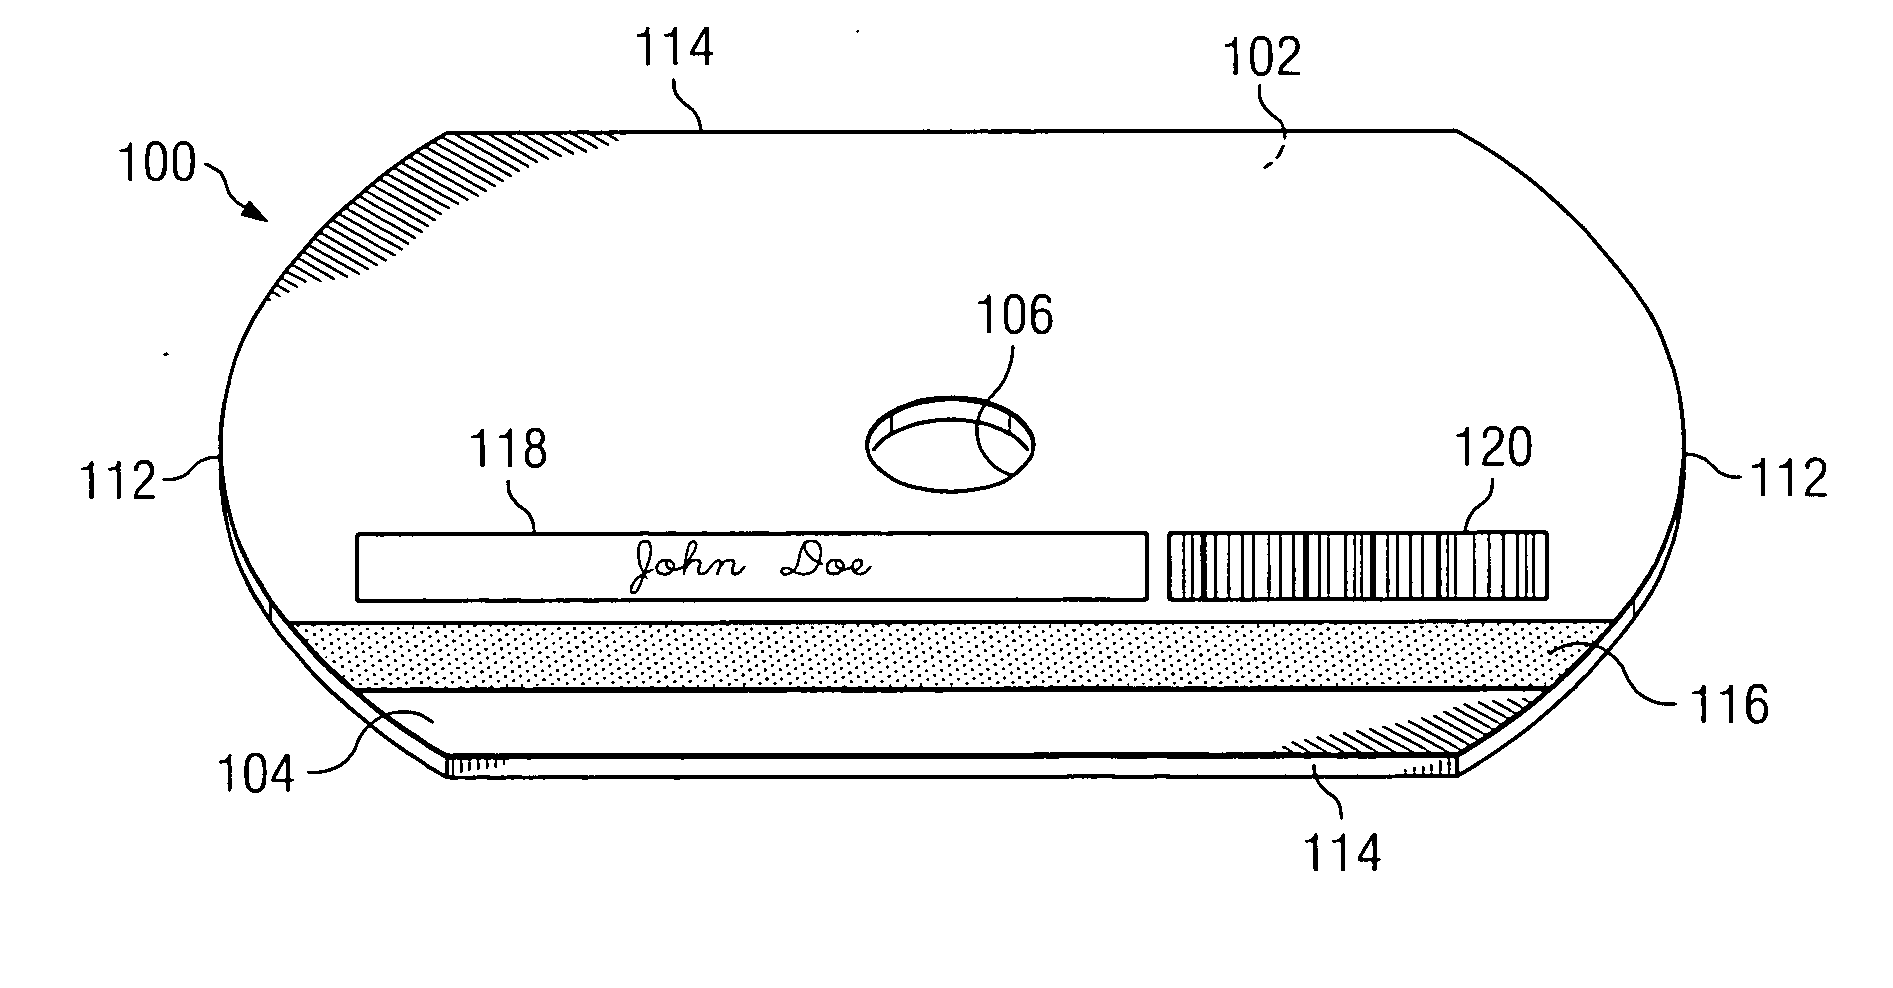 Optical disc having a reduced planar thickness